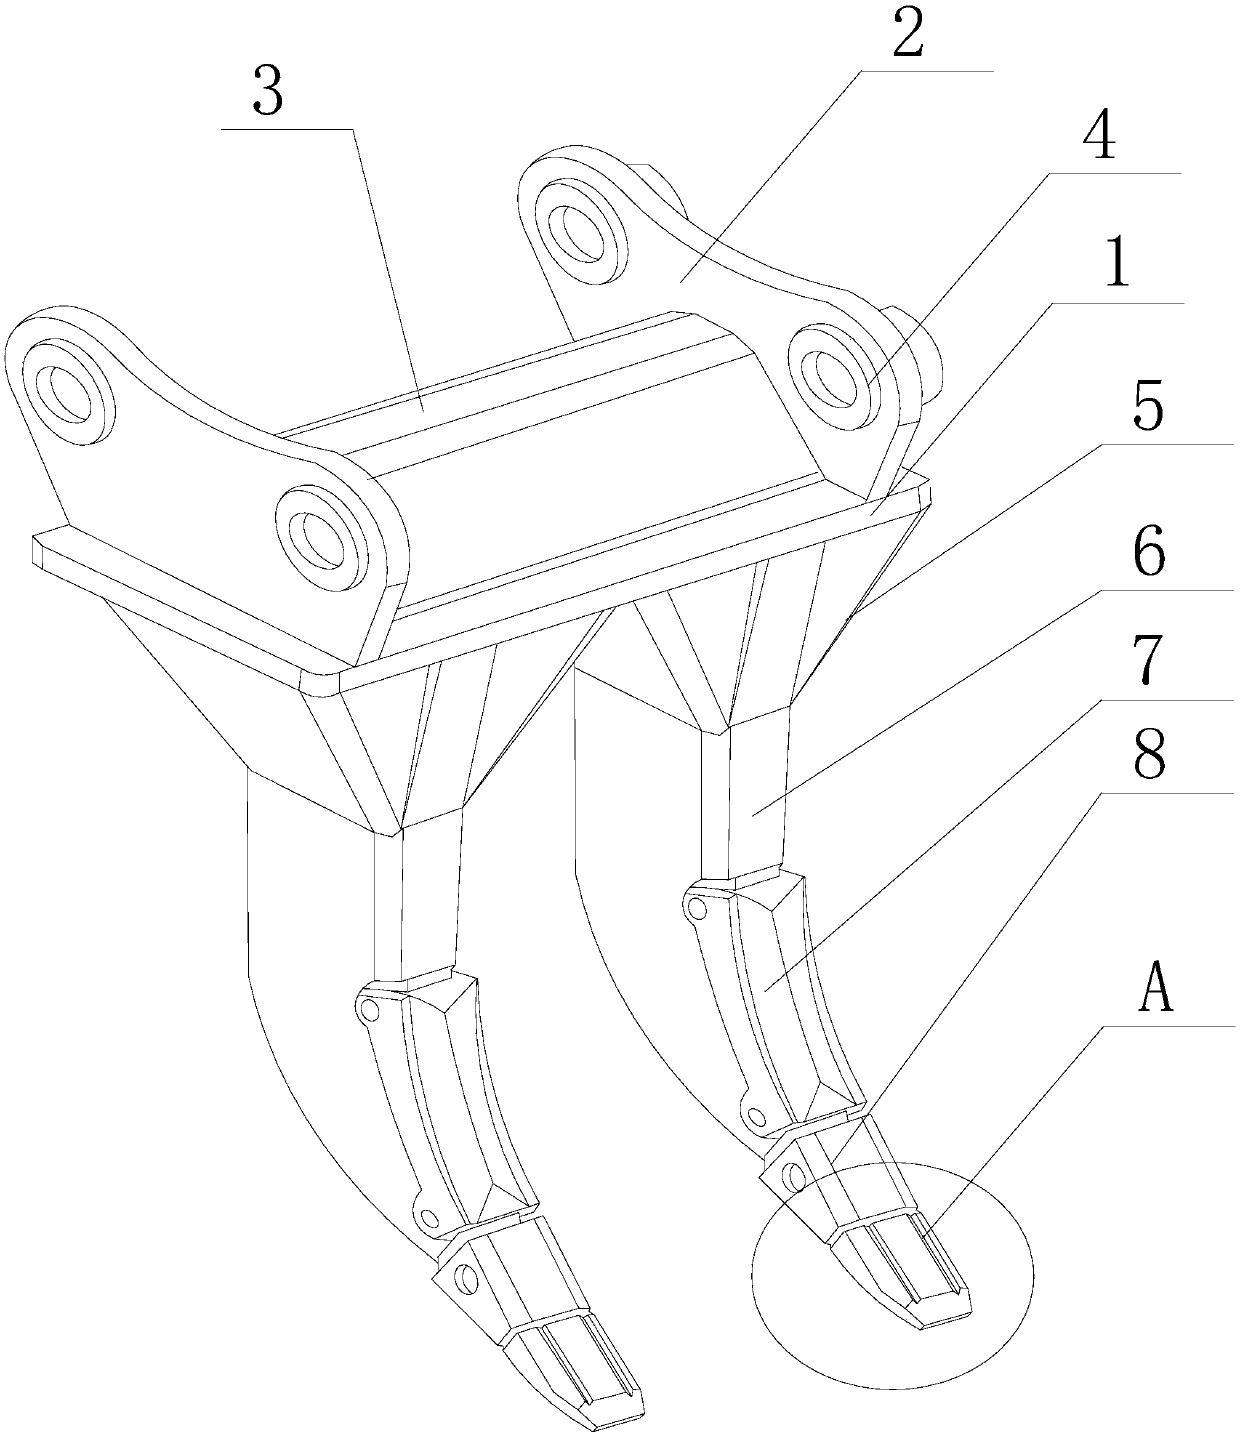 Double-end bucket hook structure of large excavator